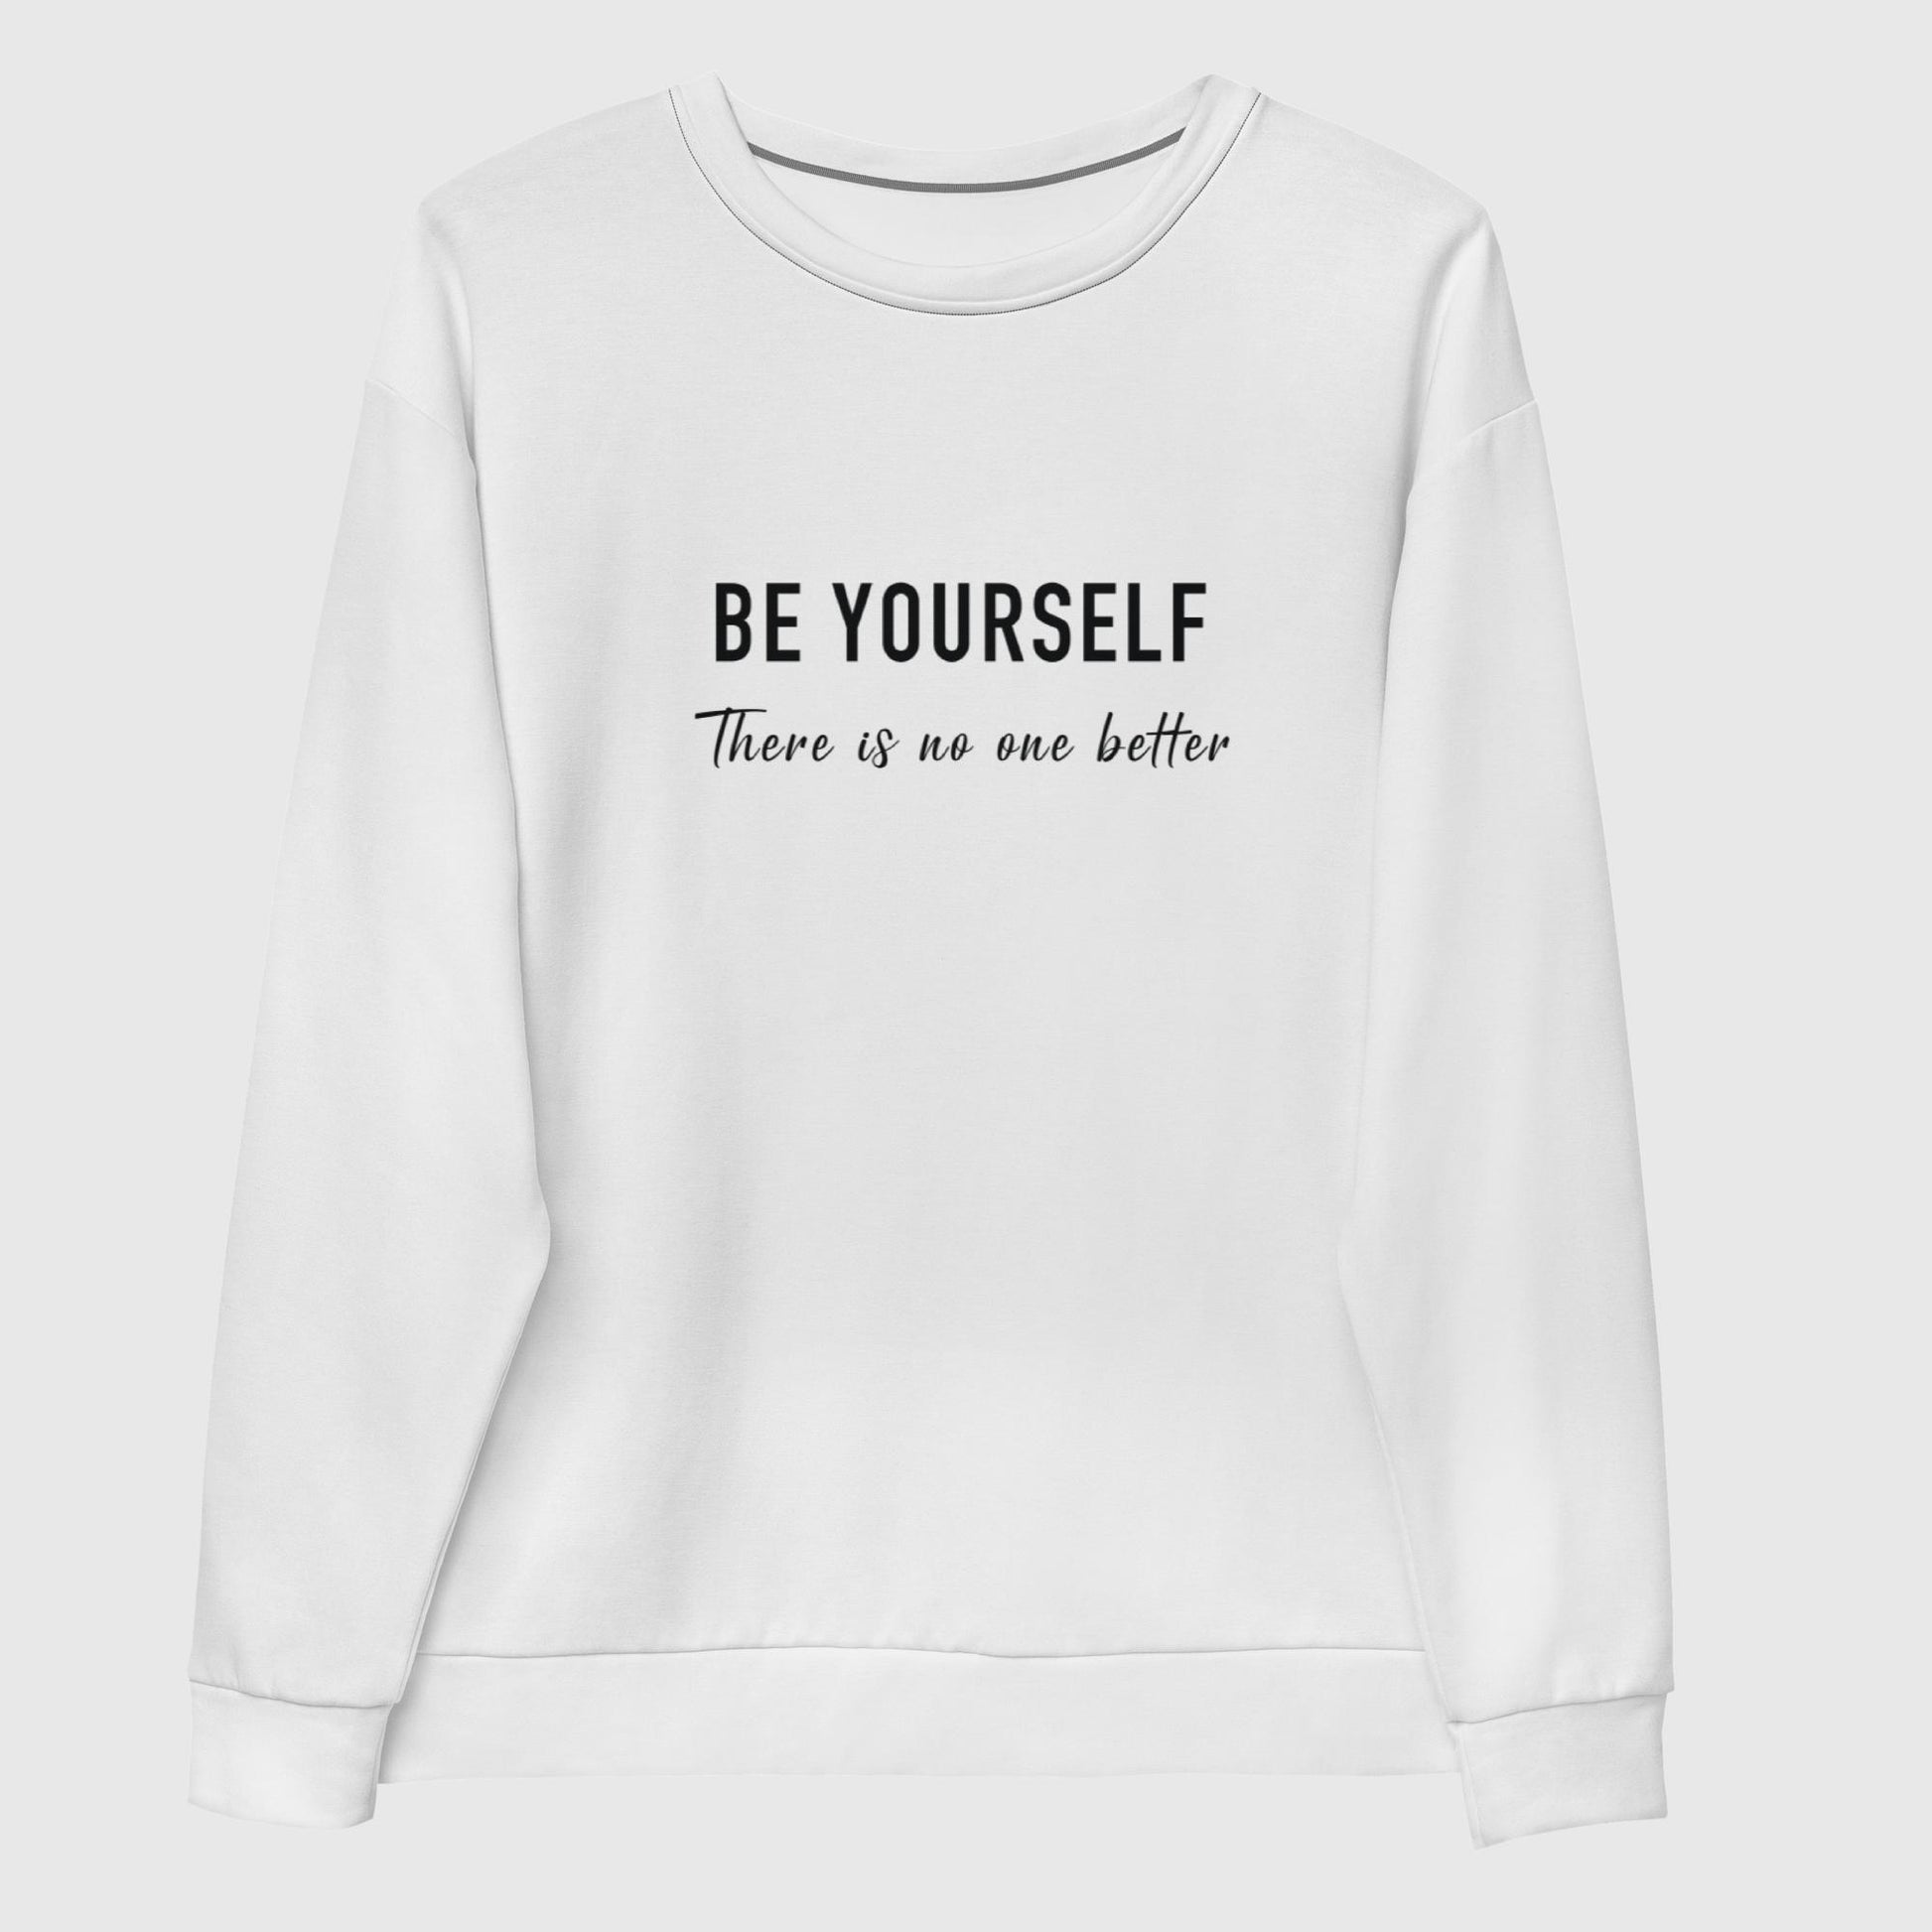 Recycled sweatshirt that features Taylor Swift's inspirational quote, "Just be yourself, there is no one better."